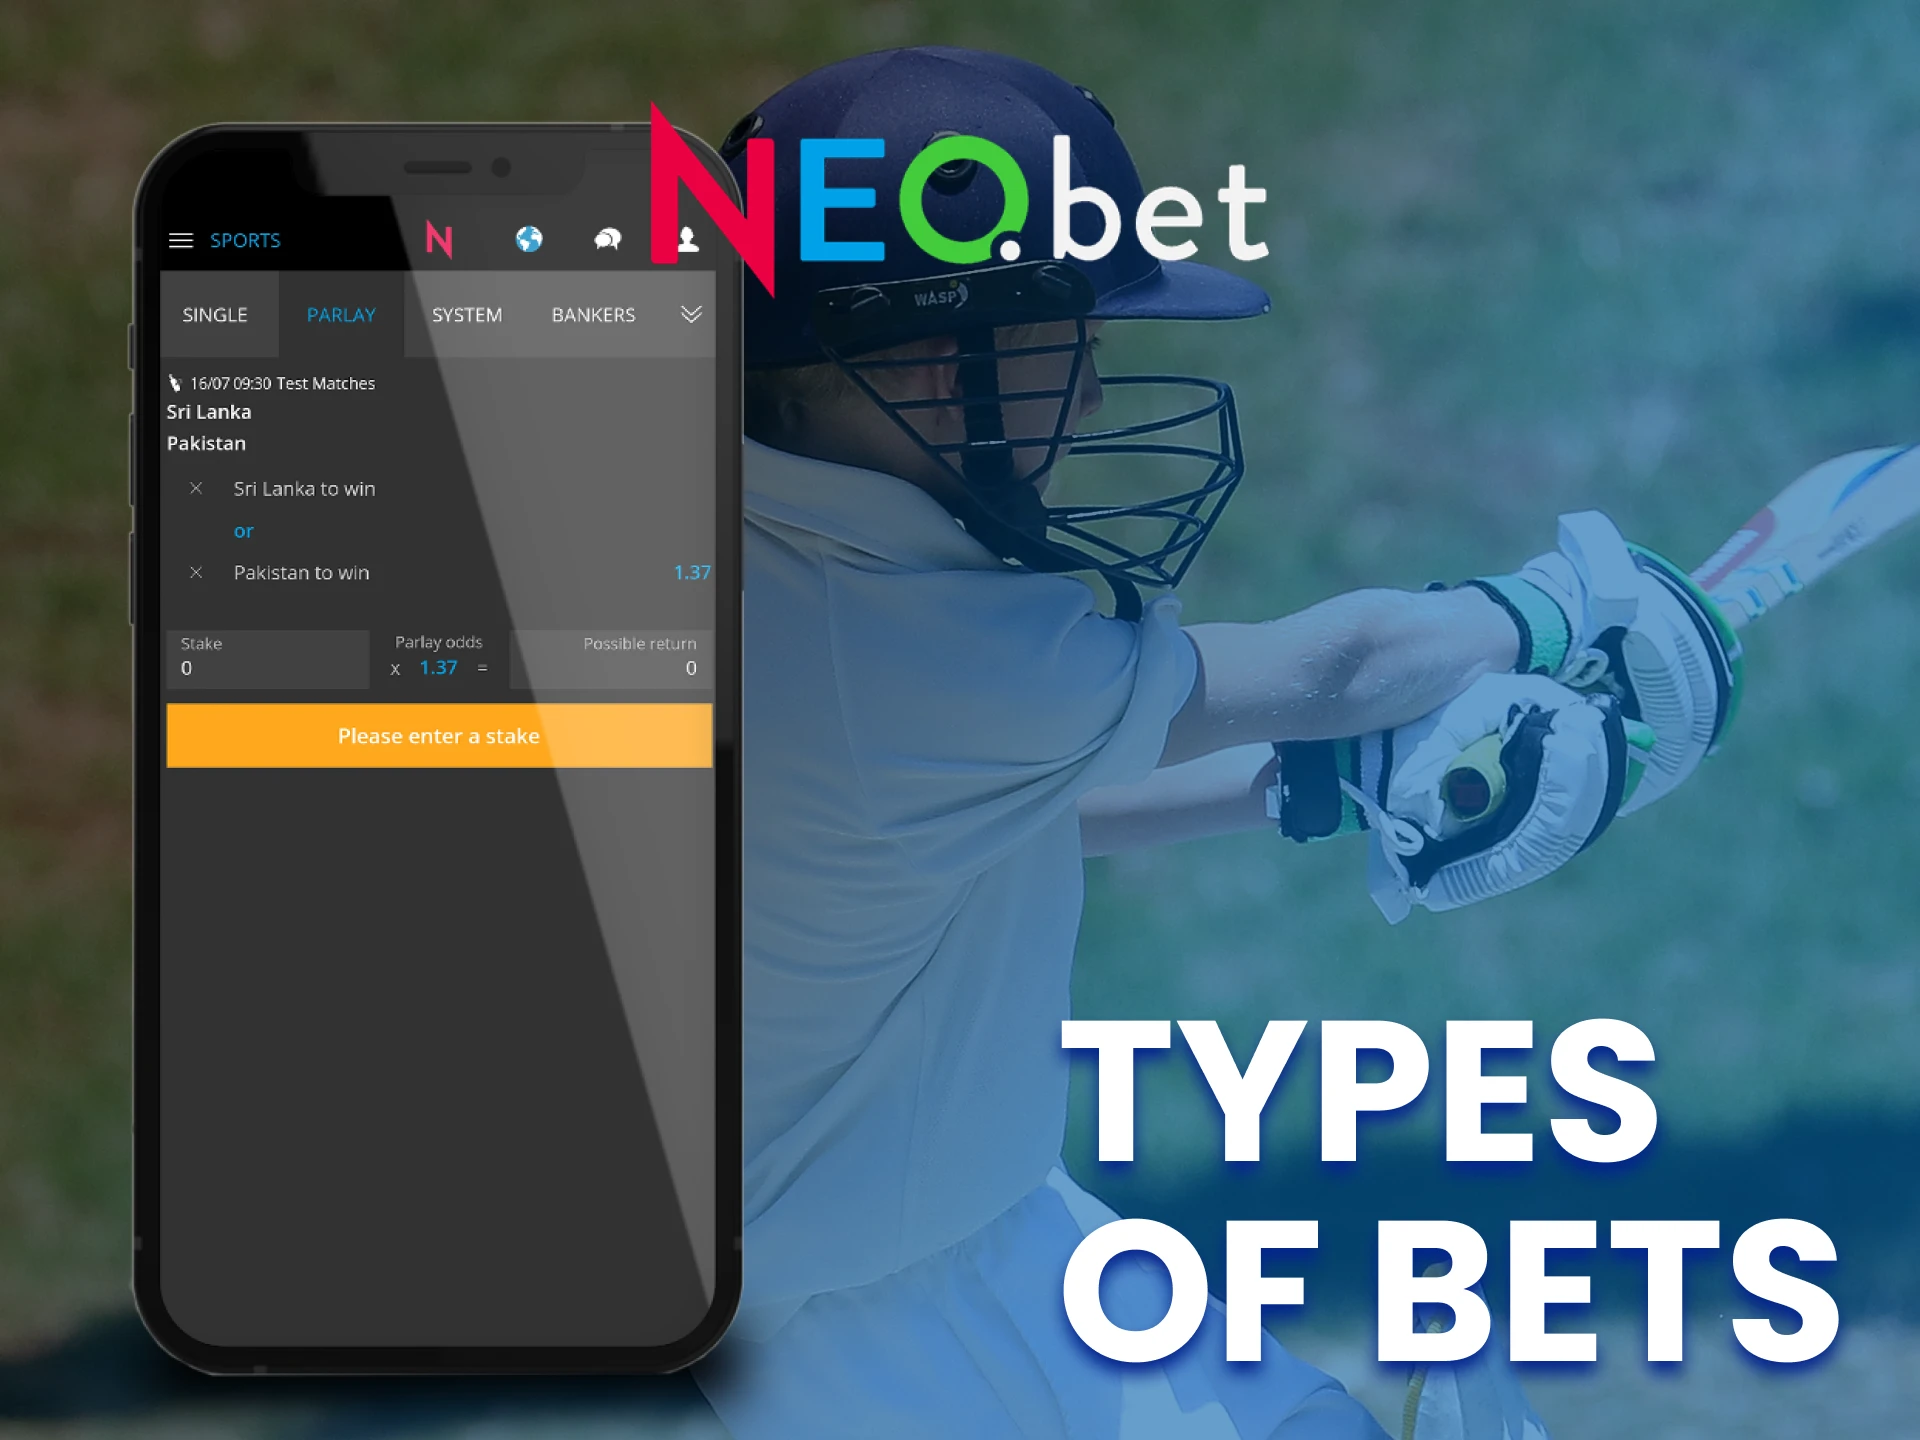 Different types of bets are available to you in the NEO.bet app.